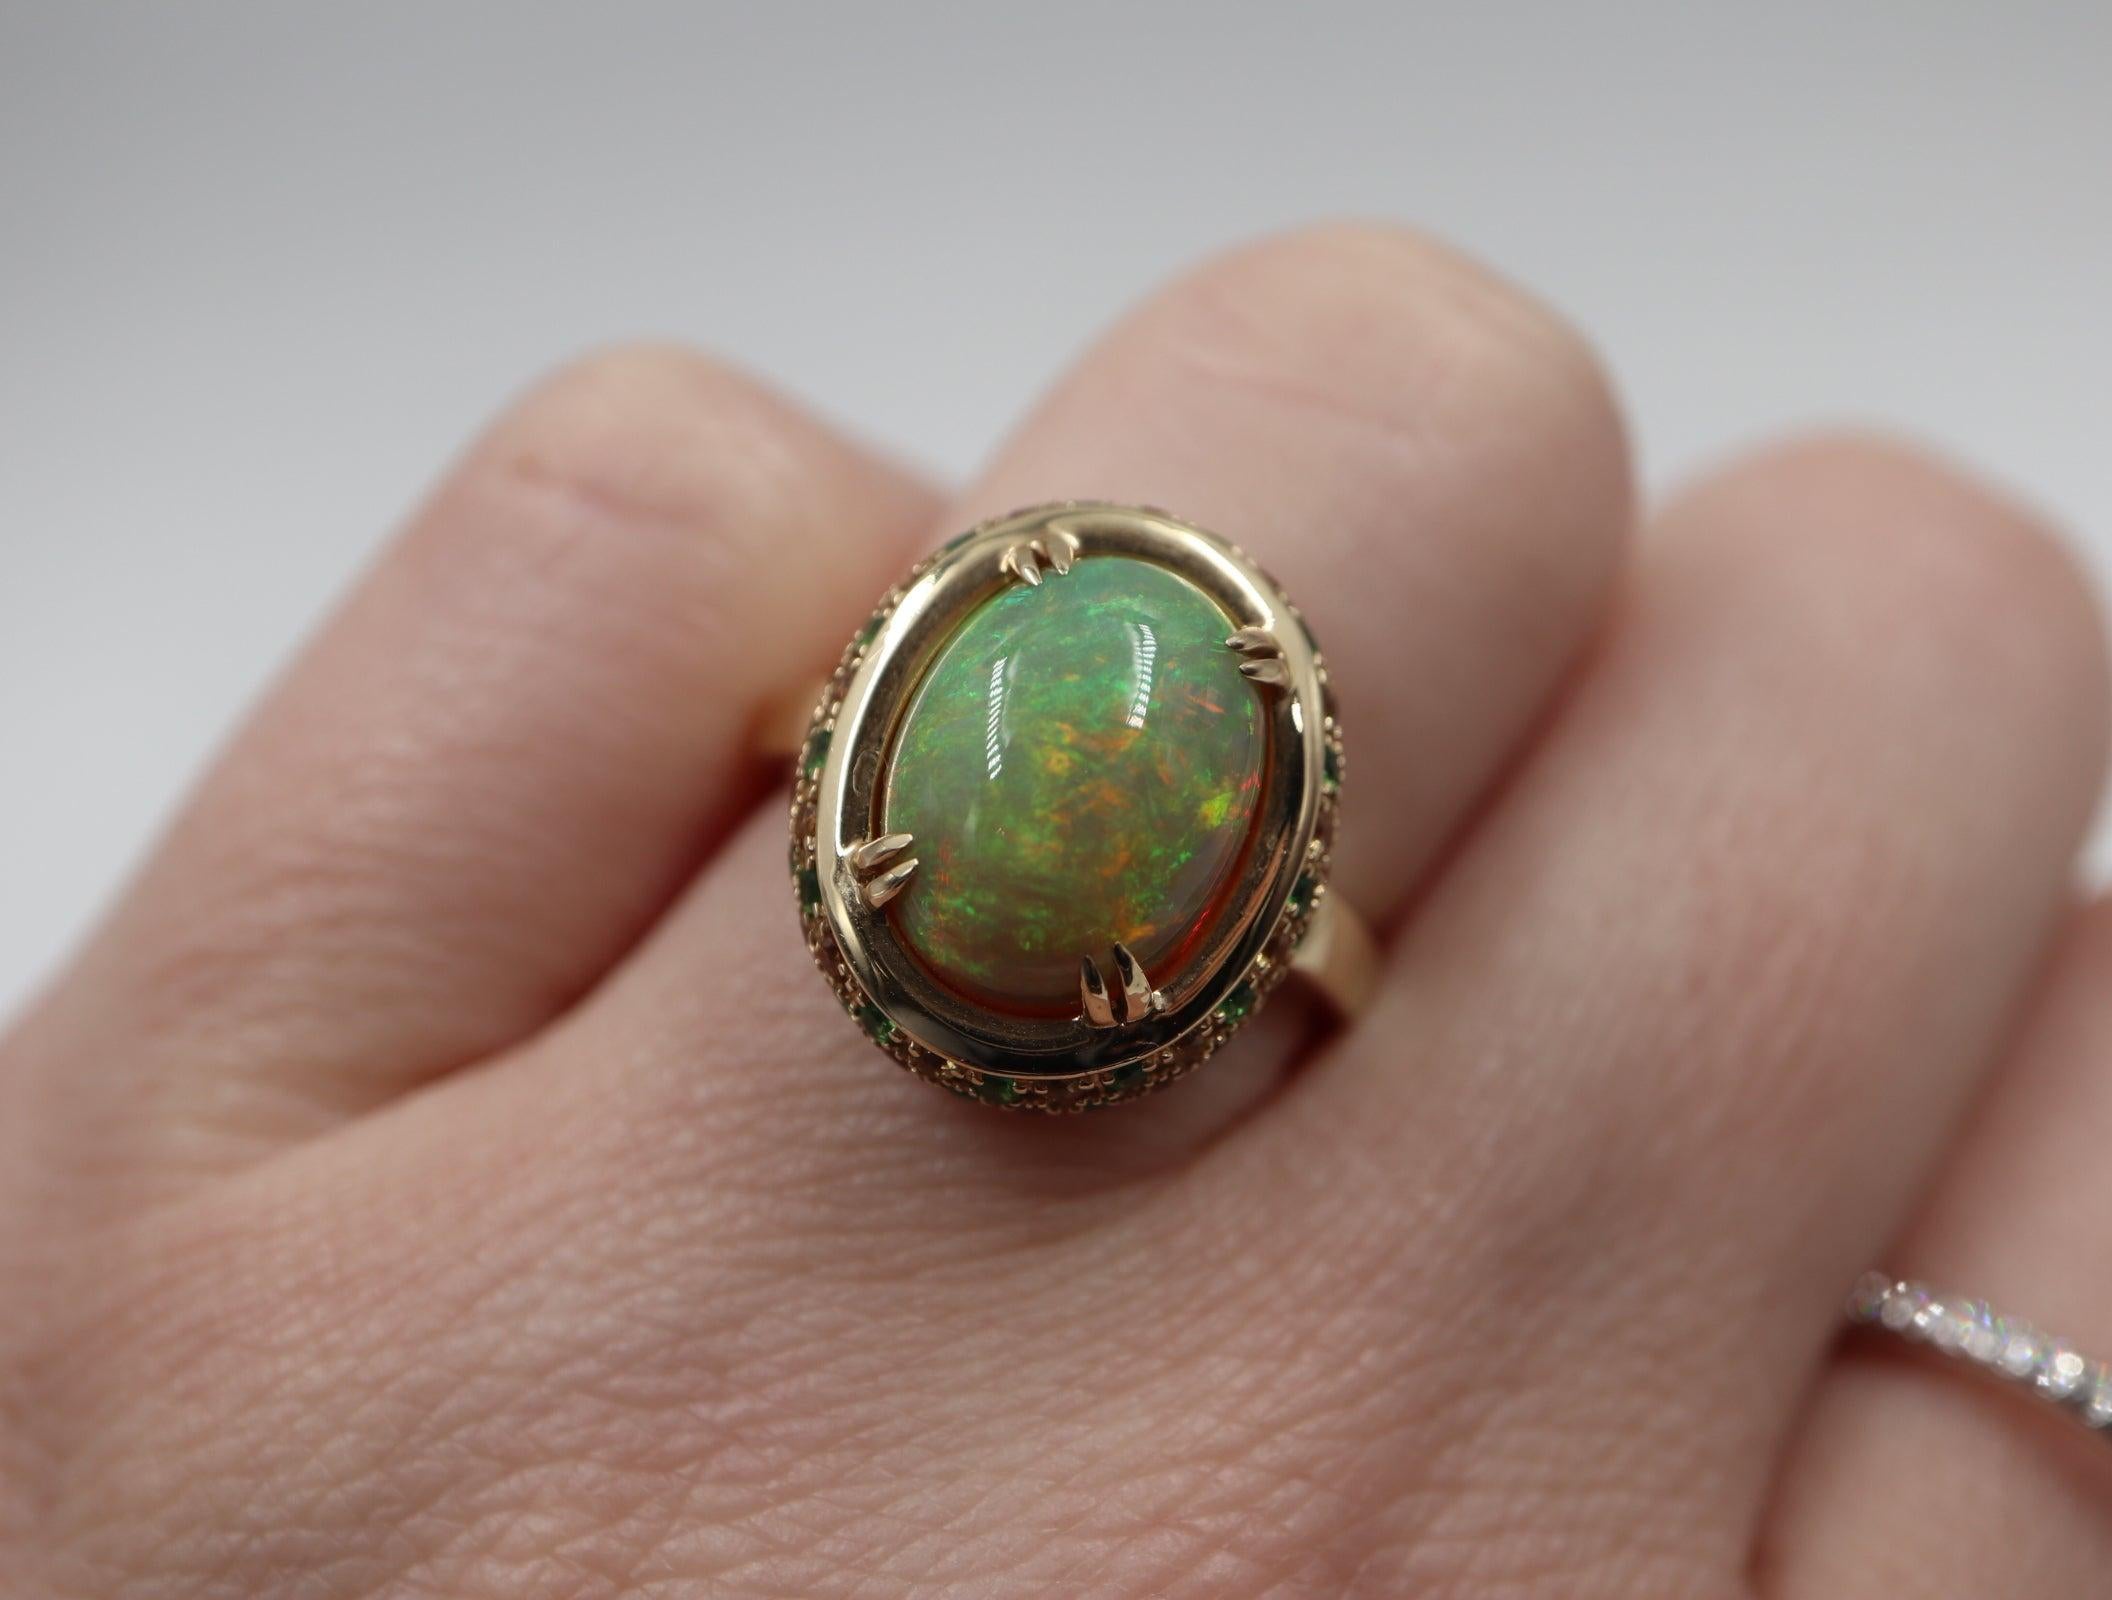 Designed in 14 karat yellow gold. This Ethiopian Opal Solitaire is surrounded by Tsavorite and Diamonds.
Opal: 3.72ctw
Diamond: 0.65ctw